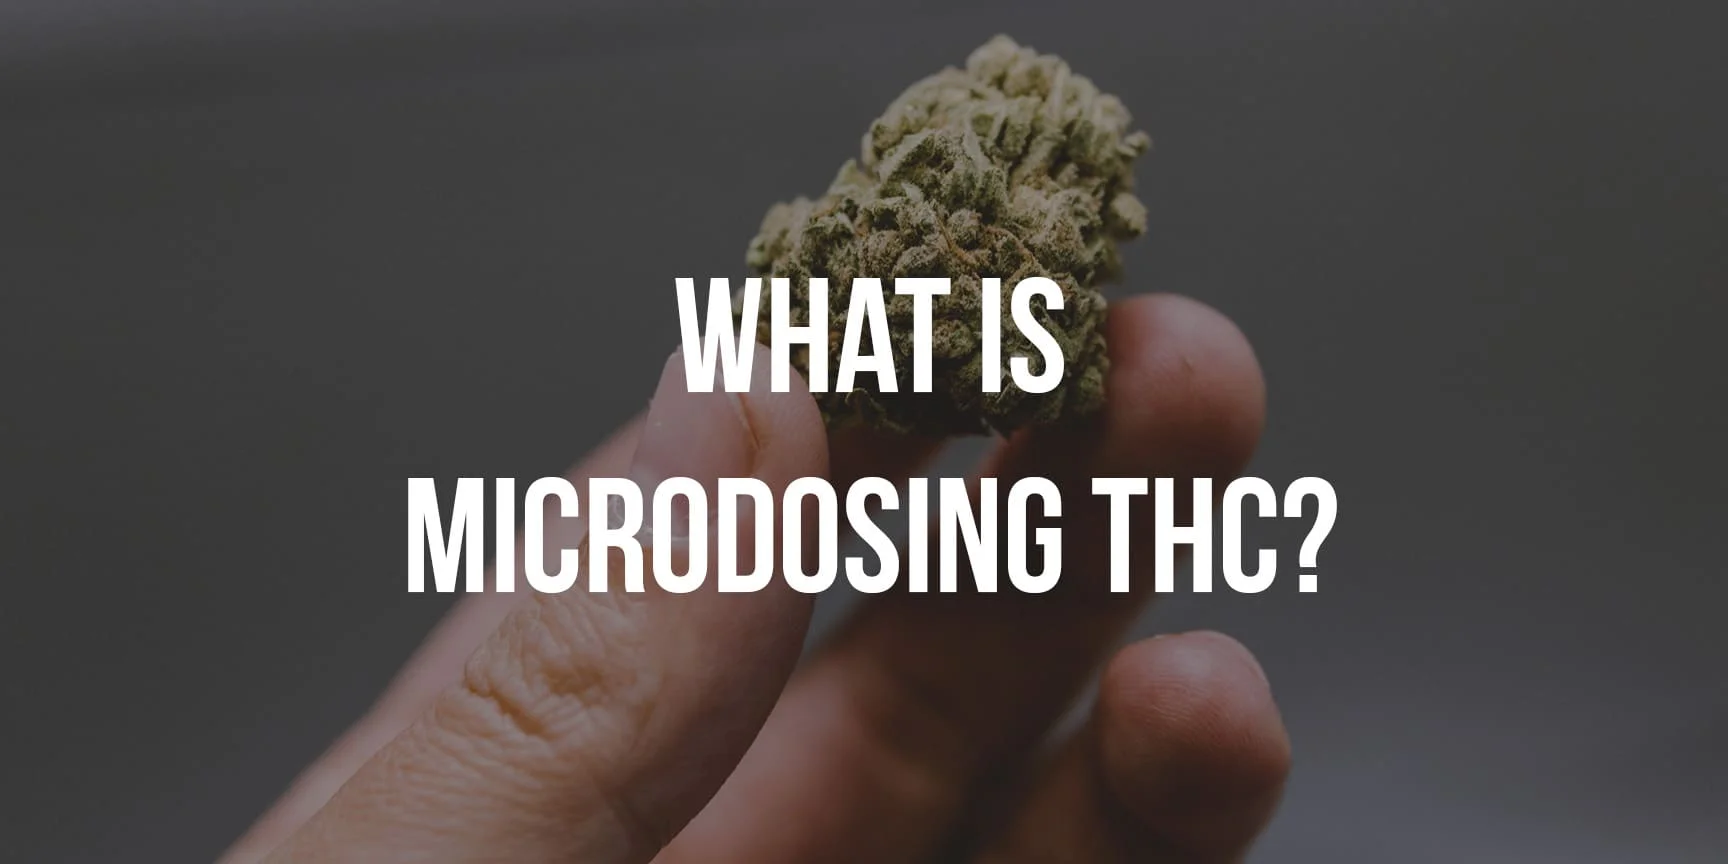 cannabis bud and lettering "What is Microdosing THC?"